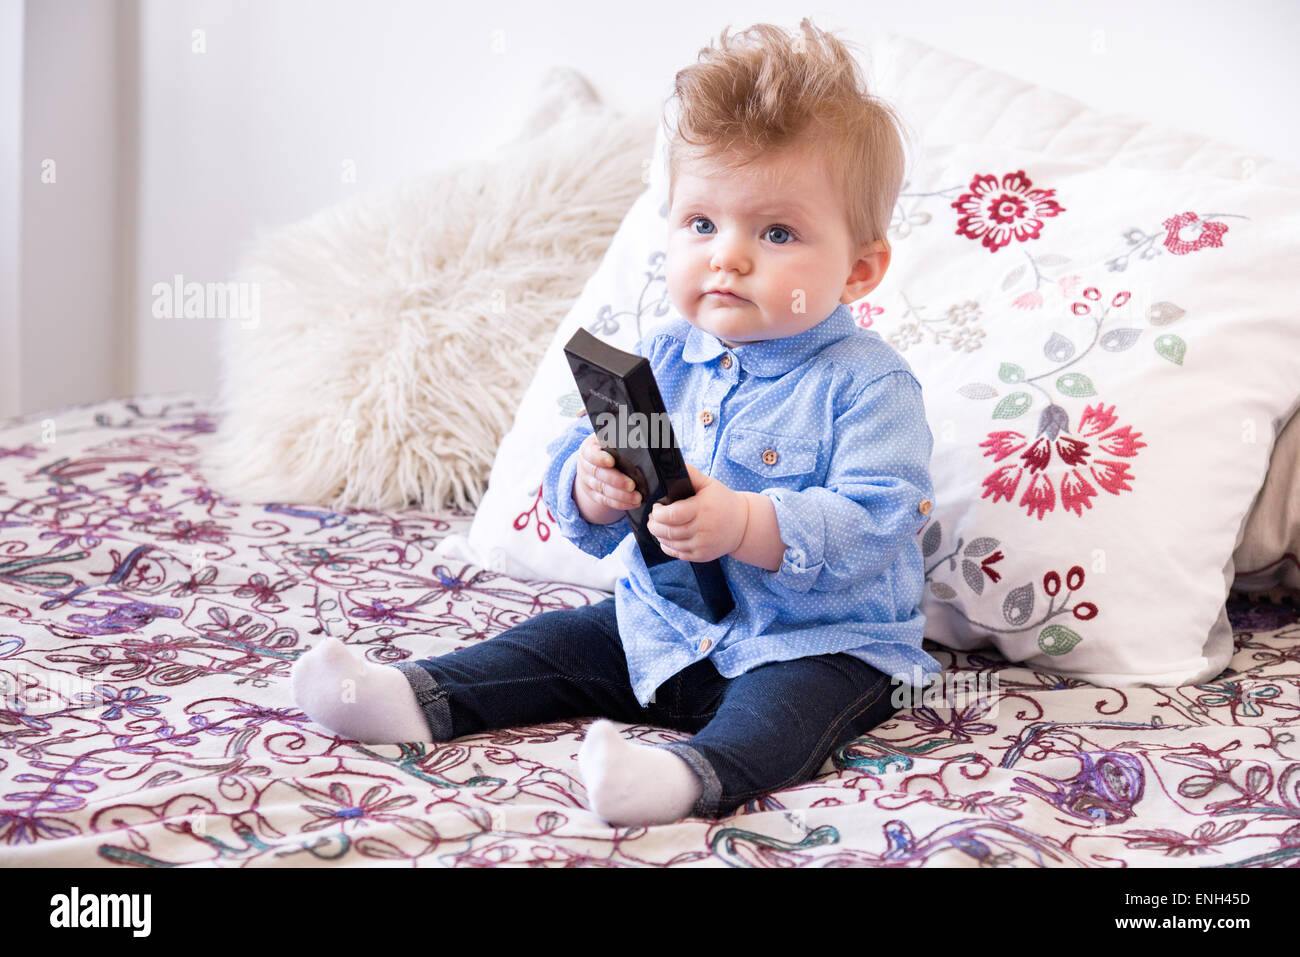 Eight month old baby watching television Stock Photo